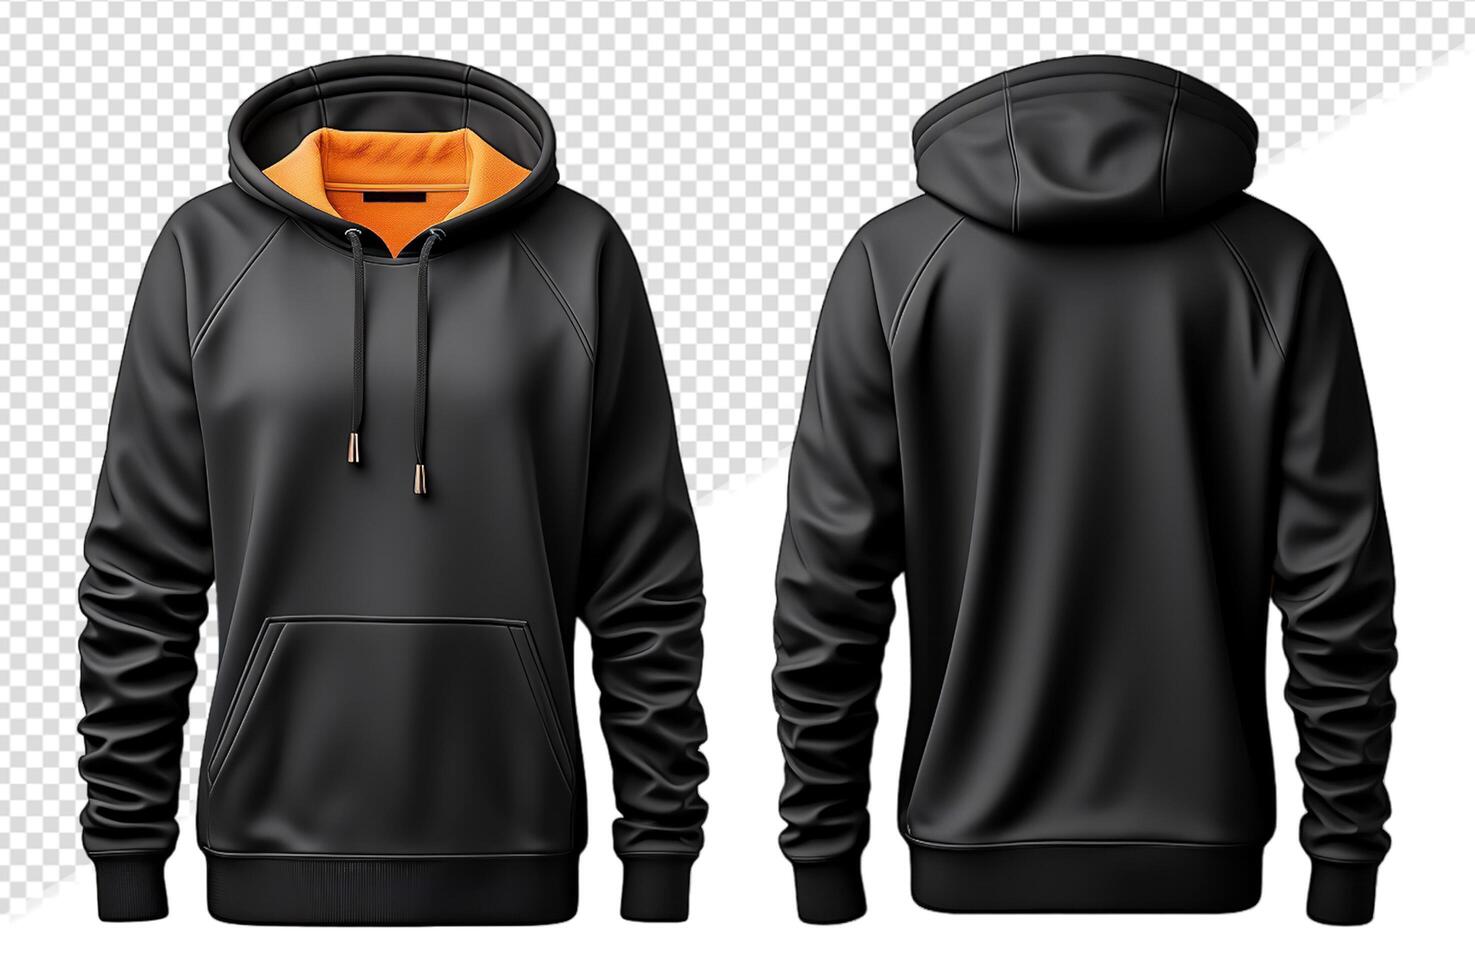 black jacket template with front and back views, cutout design isolated on transparent background, photo